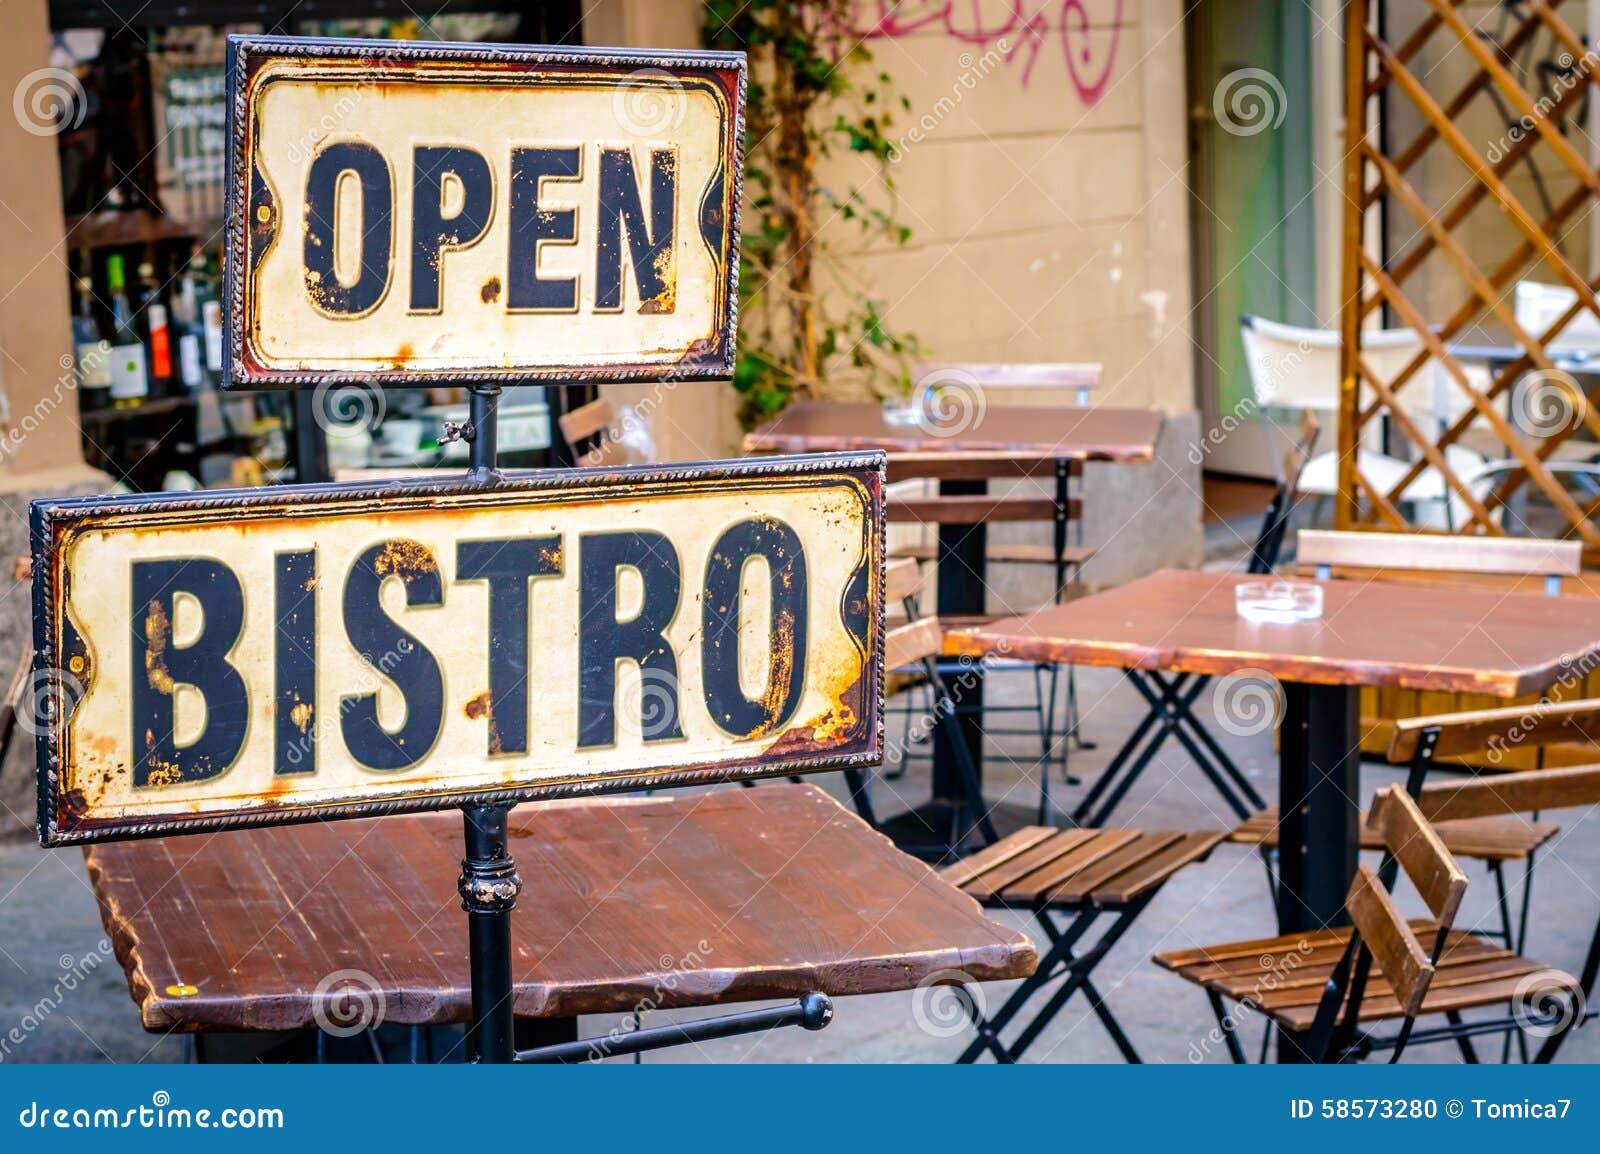 open bistro sign at the empty caffe terrace